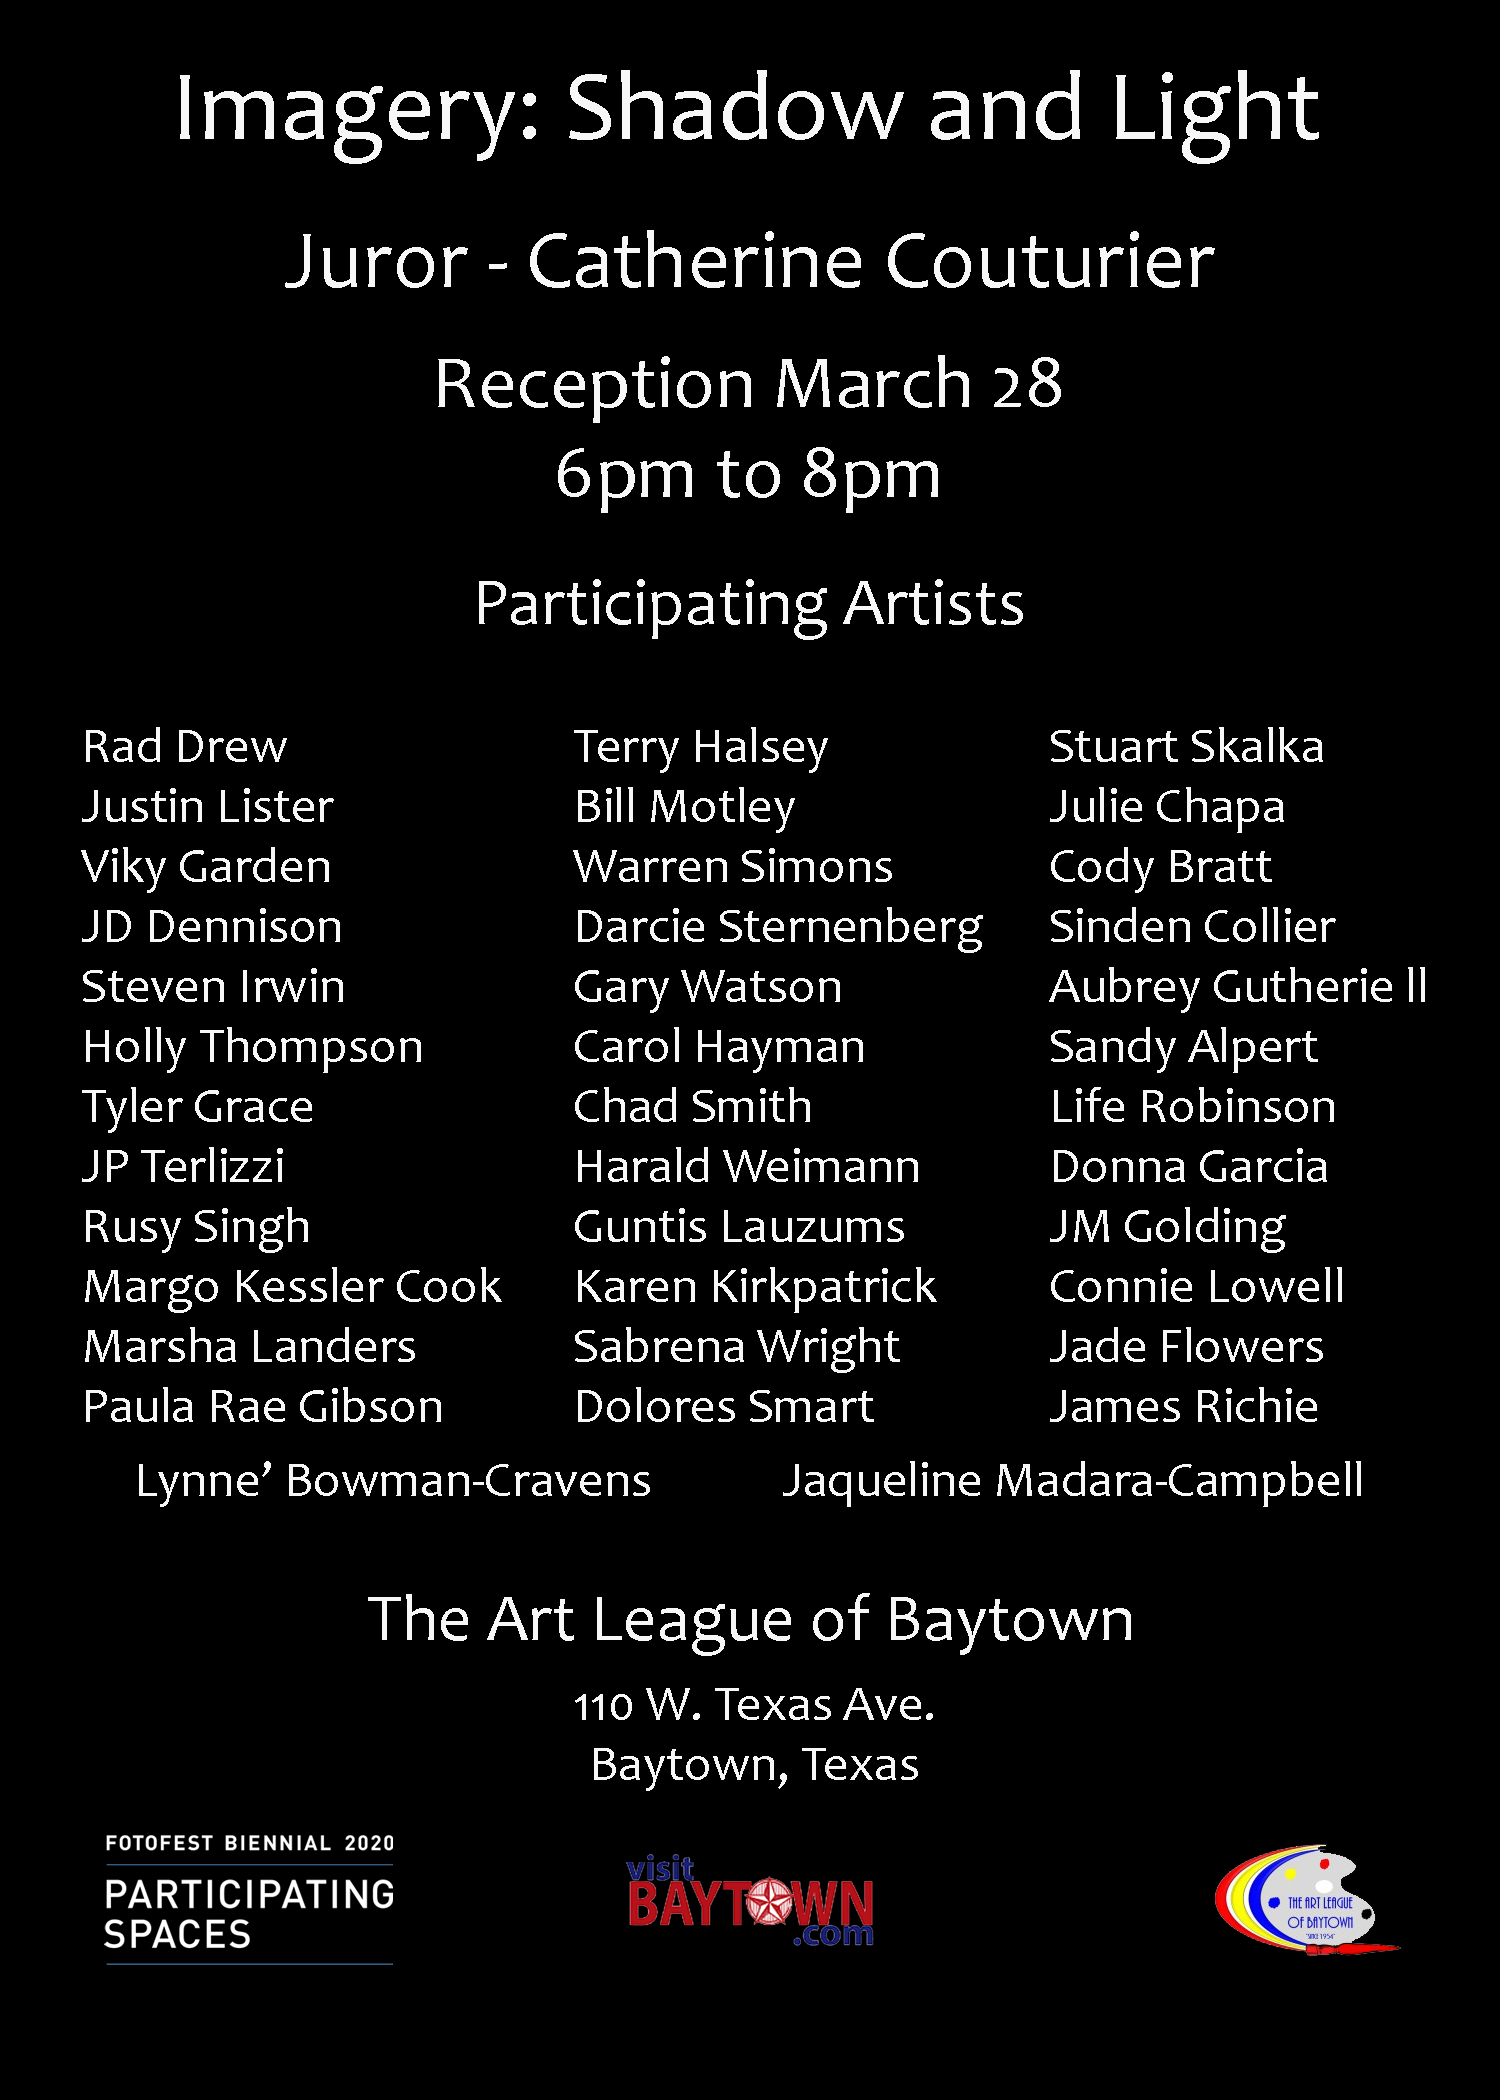 Imagery Exhibition, Baytown Art League